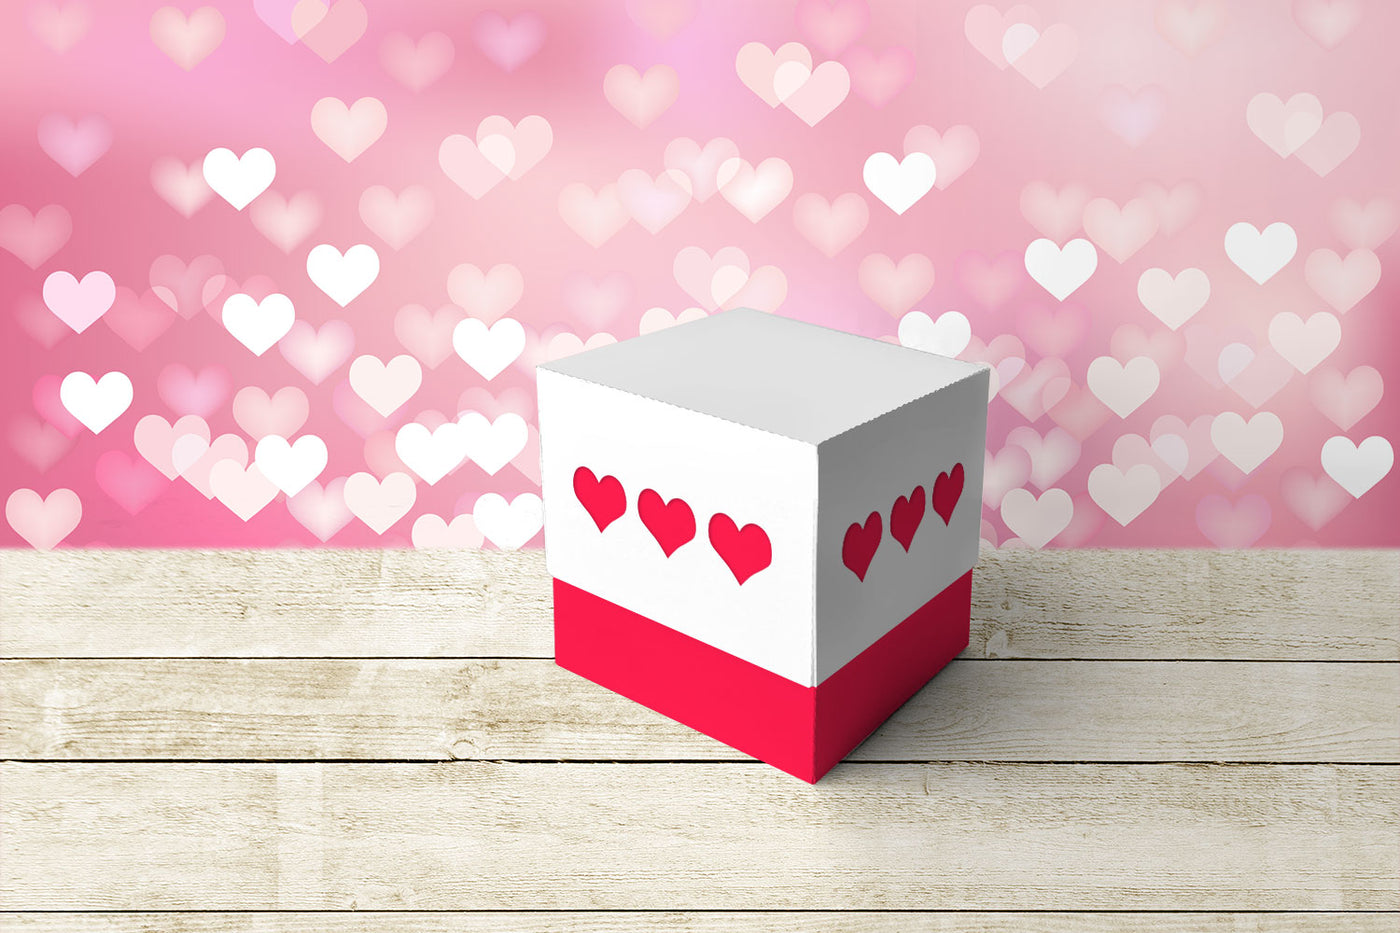 Cube box with heart cutouts on side